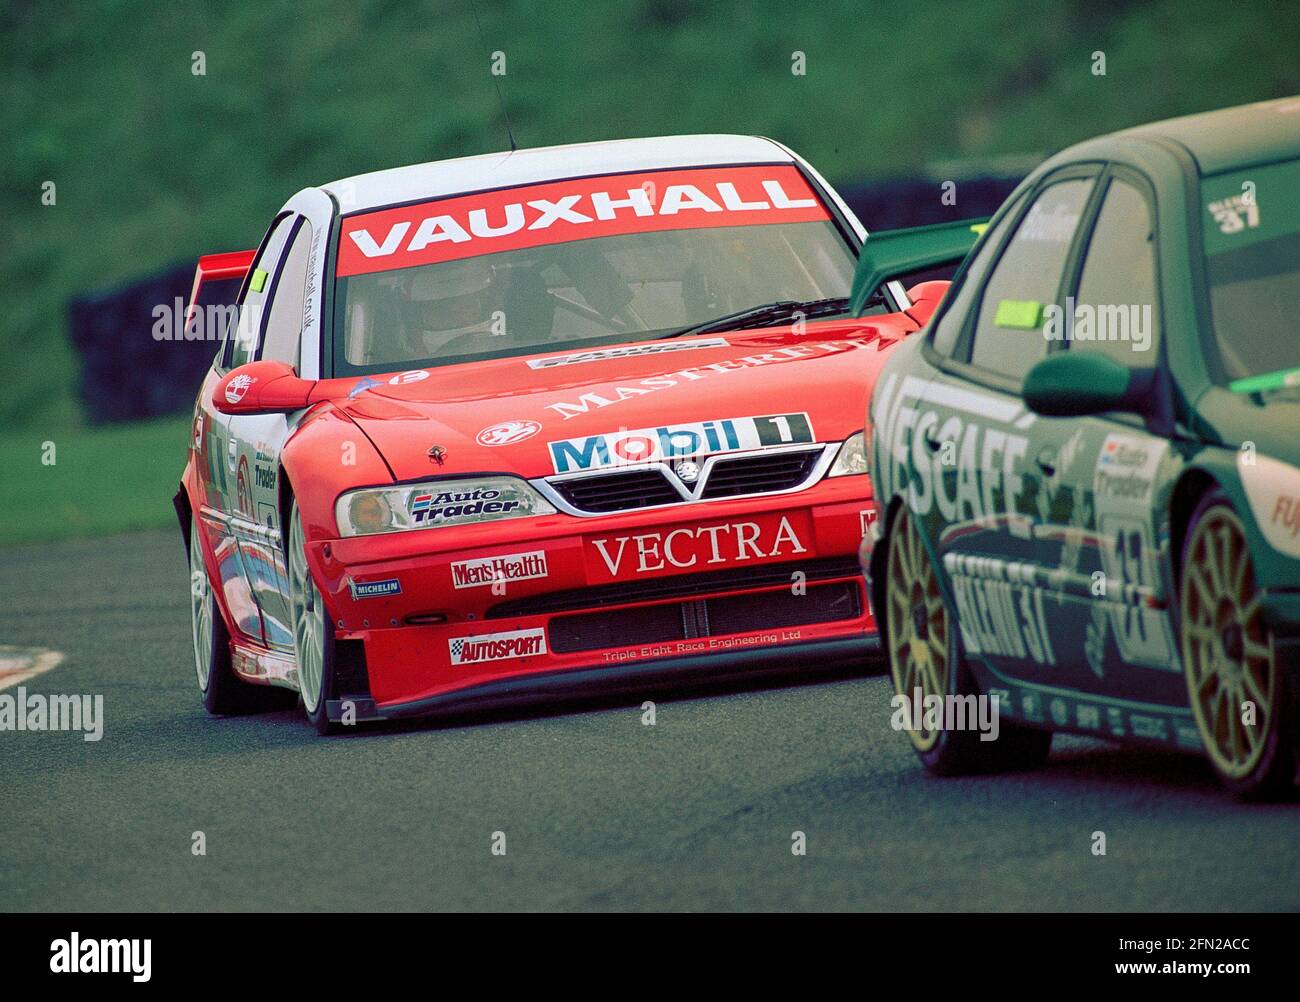 Yvan Muller in his Vauxhall Vectra in 1999 5th round of BTCC at Thruxton raceway Andover Stock Photo